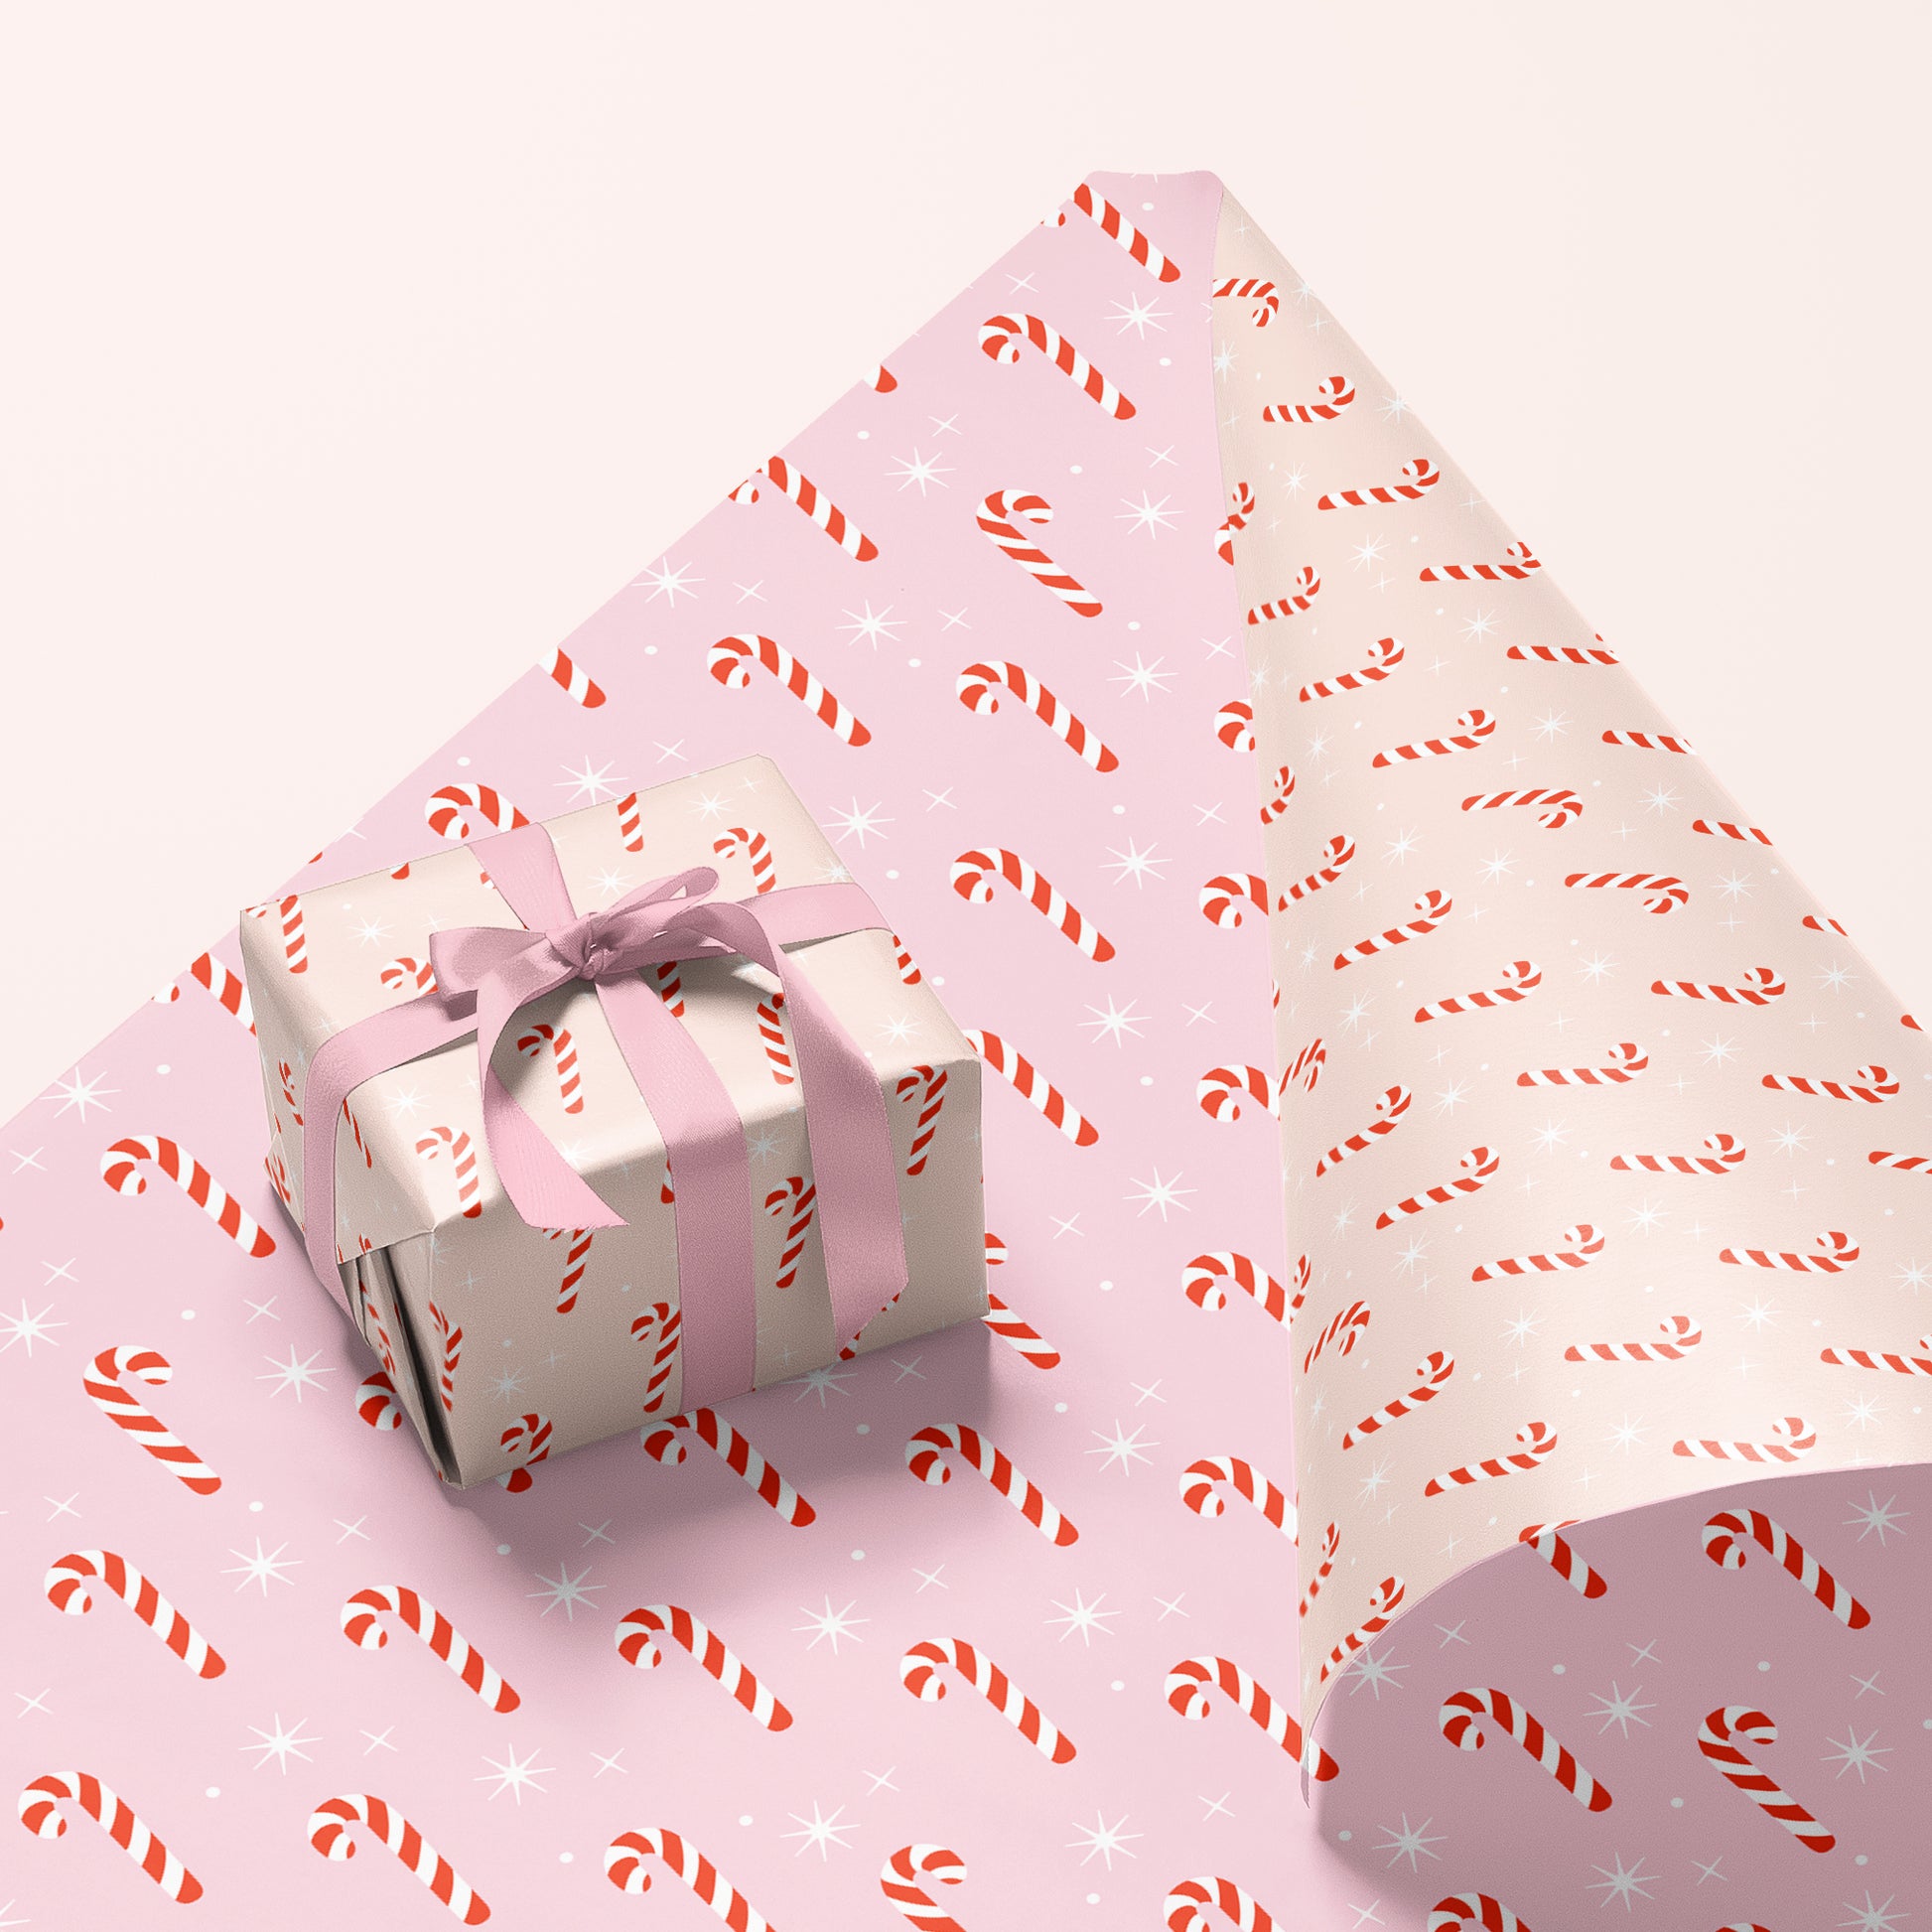 A single sheet of gift wrap with a blush background and a repeating red and white candy cane print. The gift wrap is reversible and the other side features a light purple / lavender background with an all over red and white candy cane design but the candy canes are slightly smaller than the reverse.